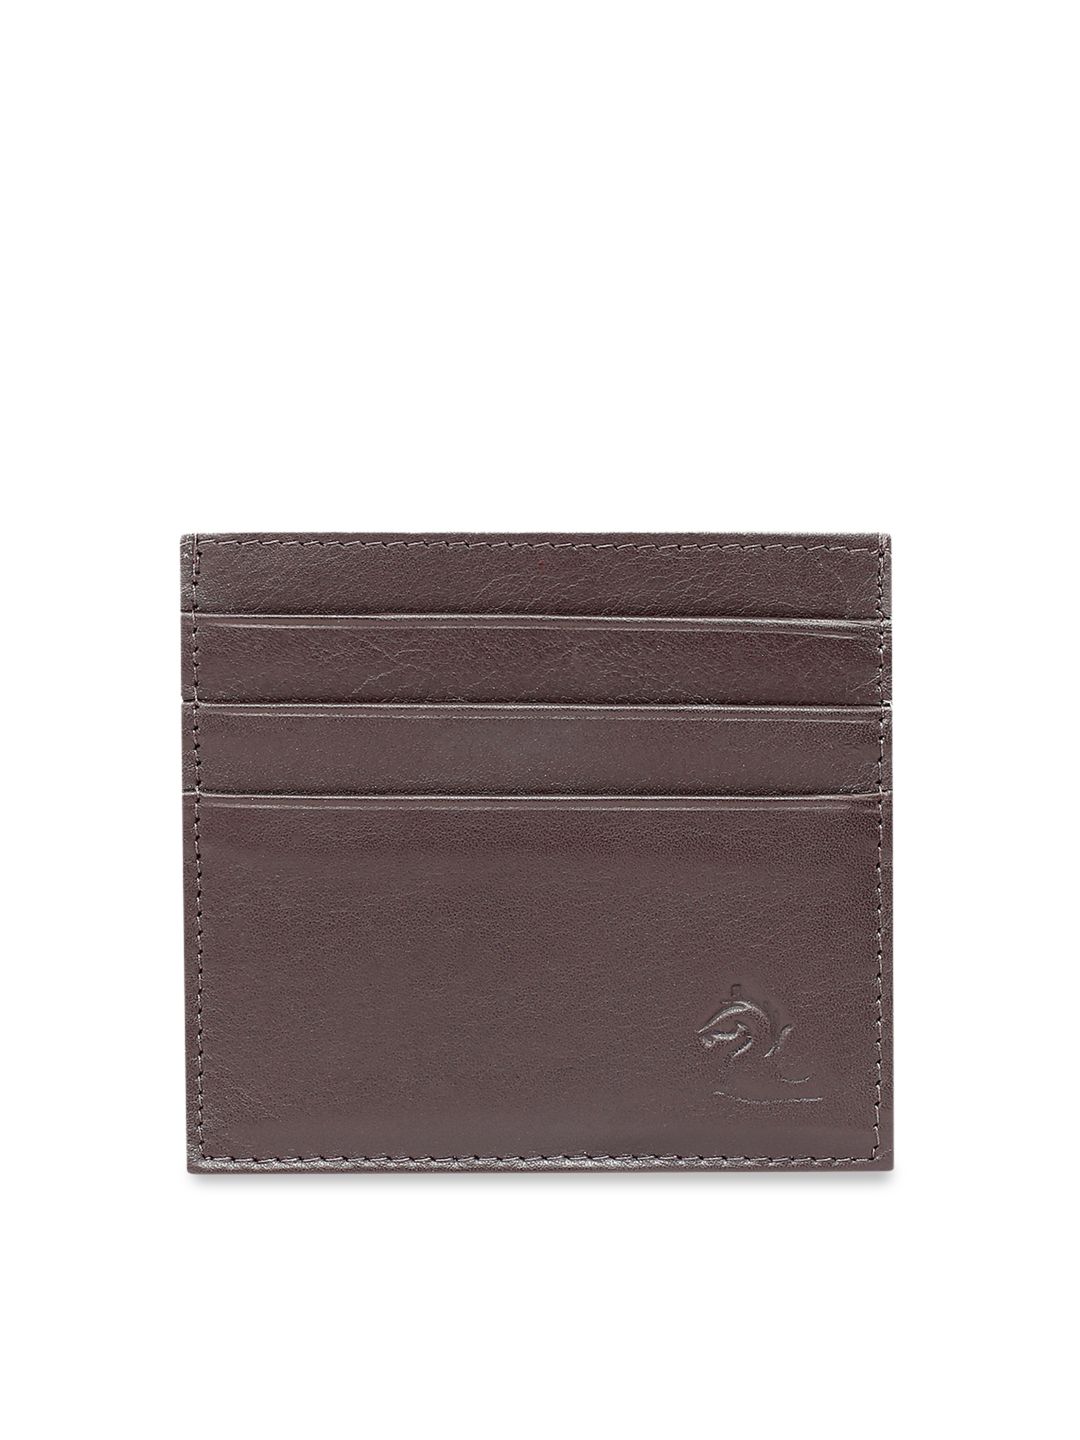 Kara Unisex Brown Solid Leather Card Holder Price in India